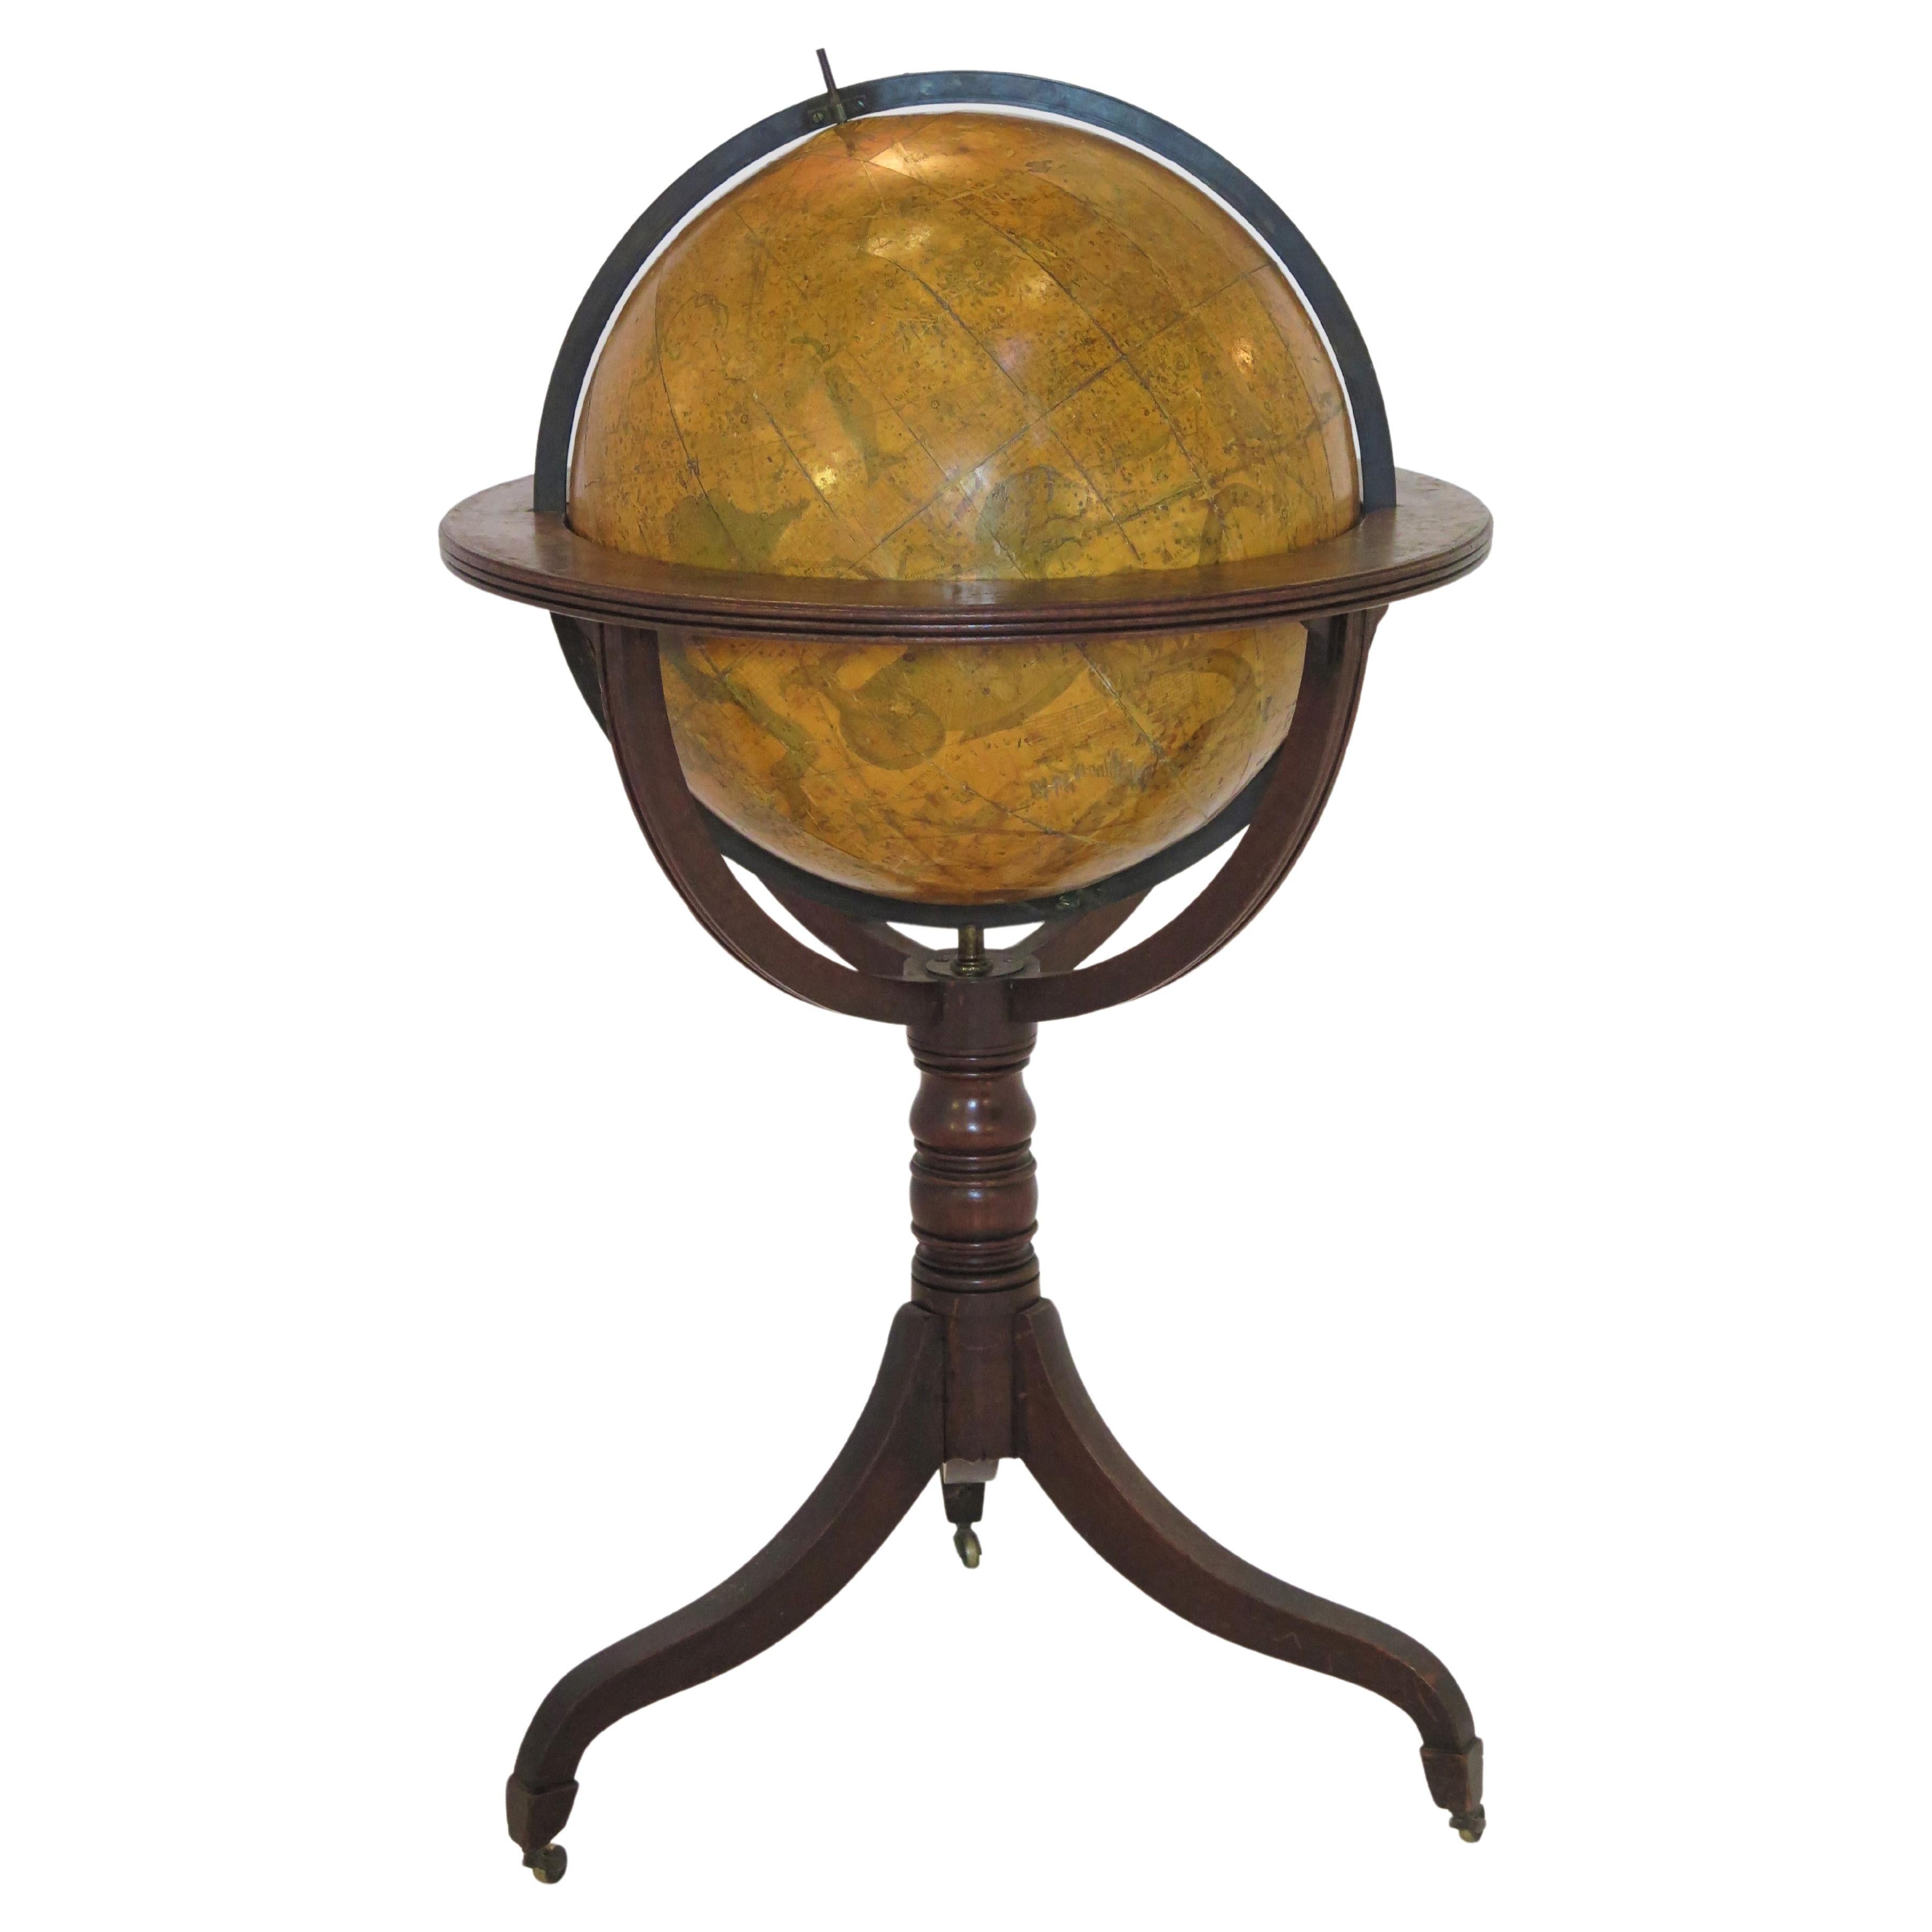 What is part of the celestial globe?